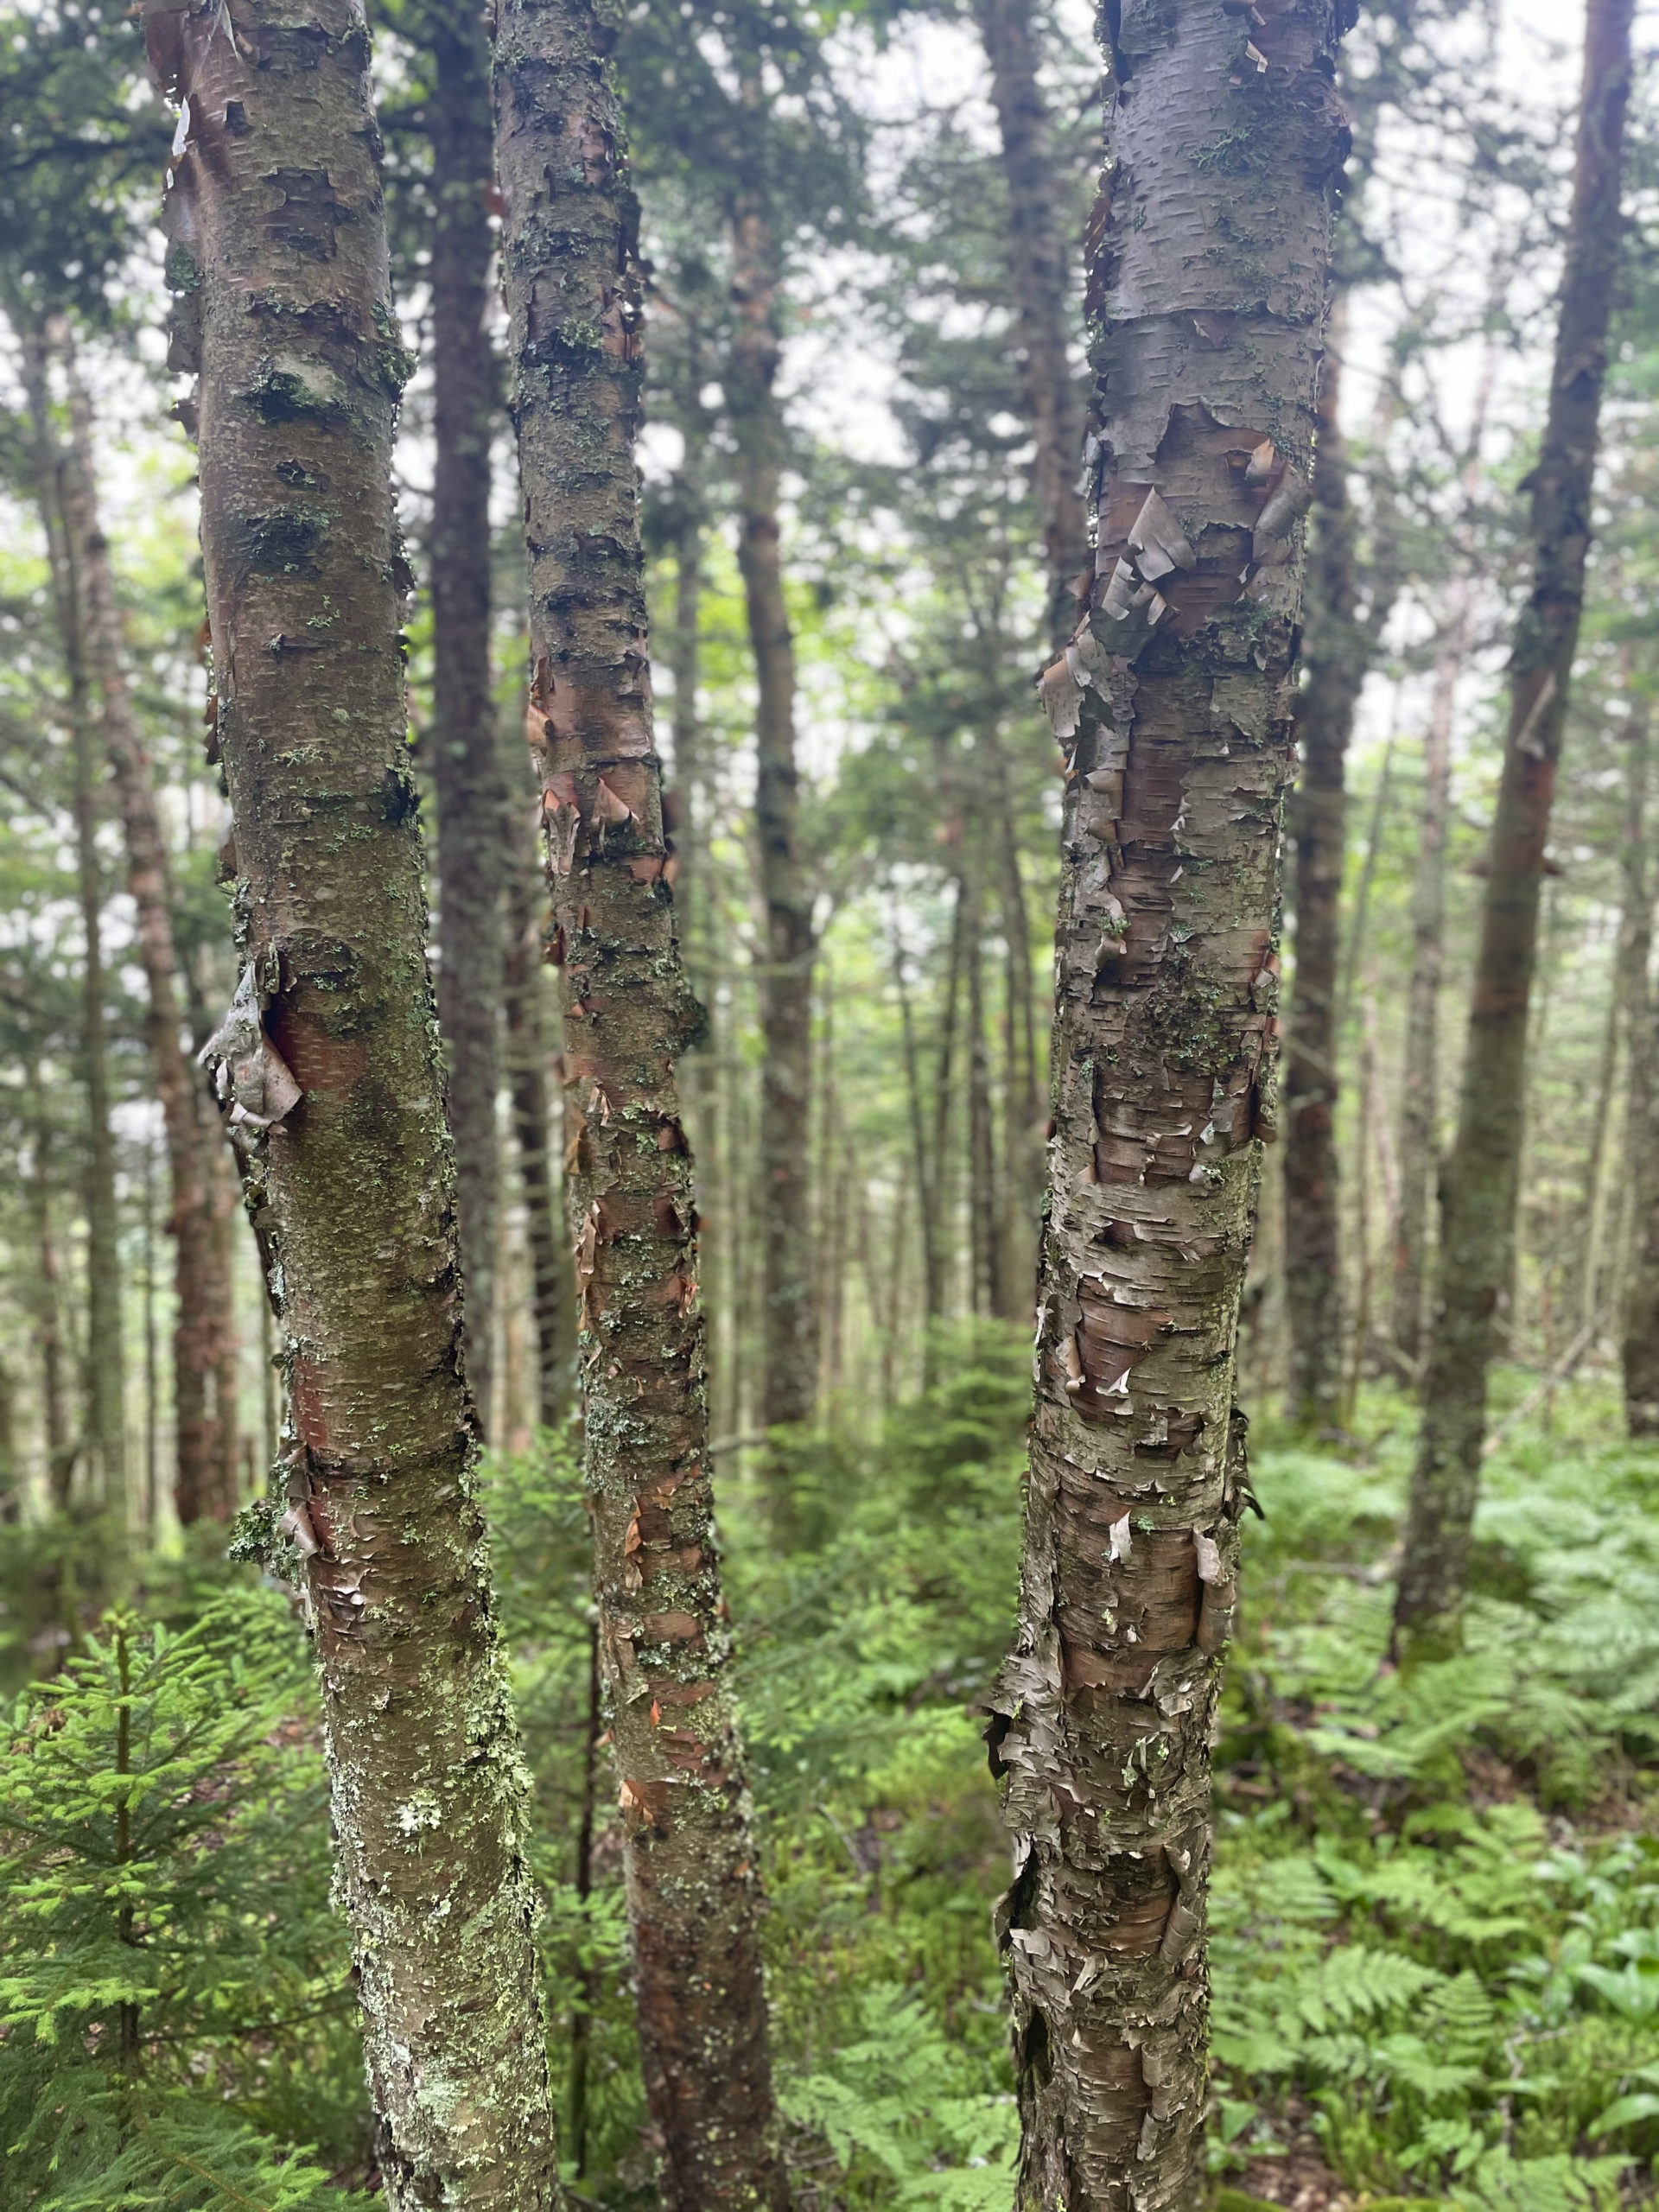 Peeling birches seen while hiking Mt. Waumbek and Mt. Cabot in the White Mountain National Forest, New Hampshire